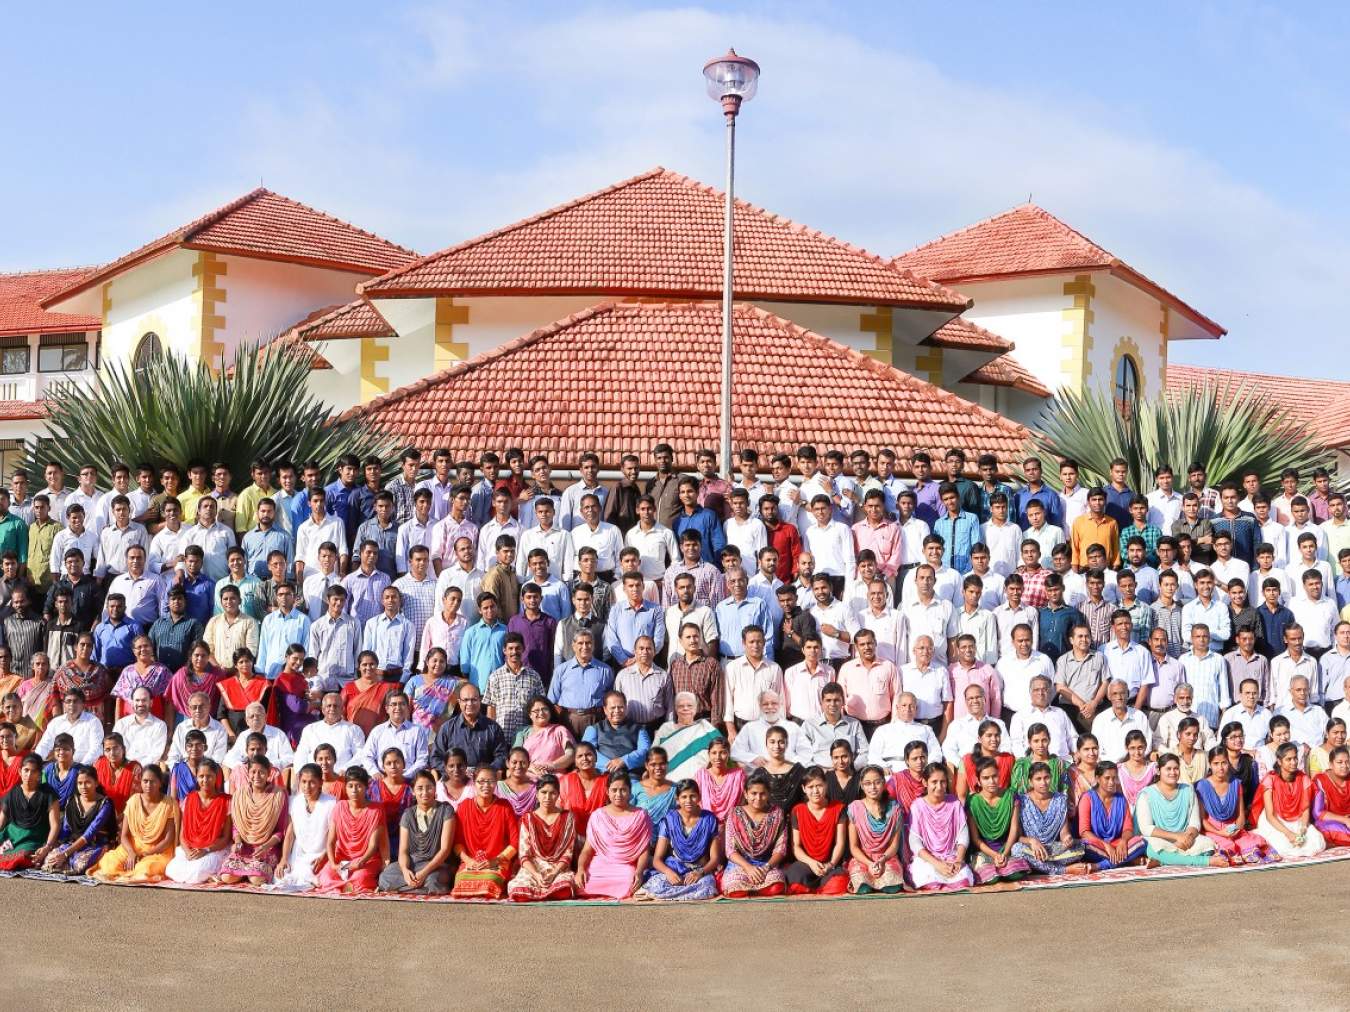 Pastor Stephen and Mary Abraham’s teaching and mentoring ministry at India Bible College and Seminary saw thousands of men and women trained for evangelism and church planting in unreached groups throughout India.